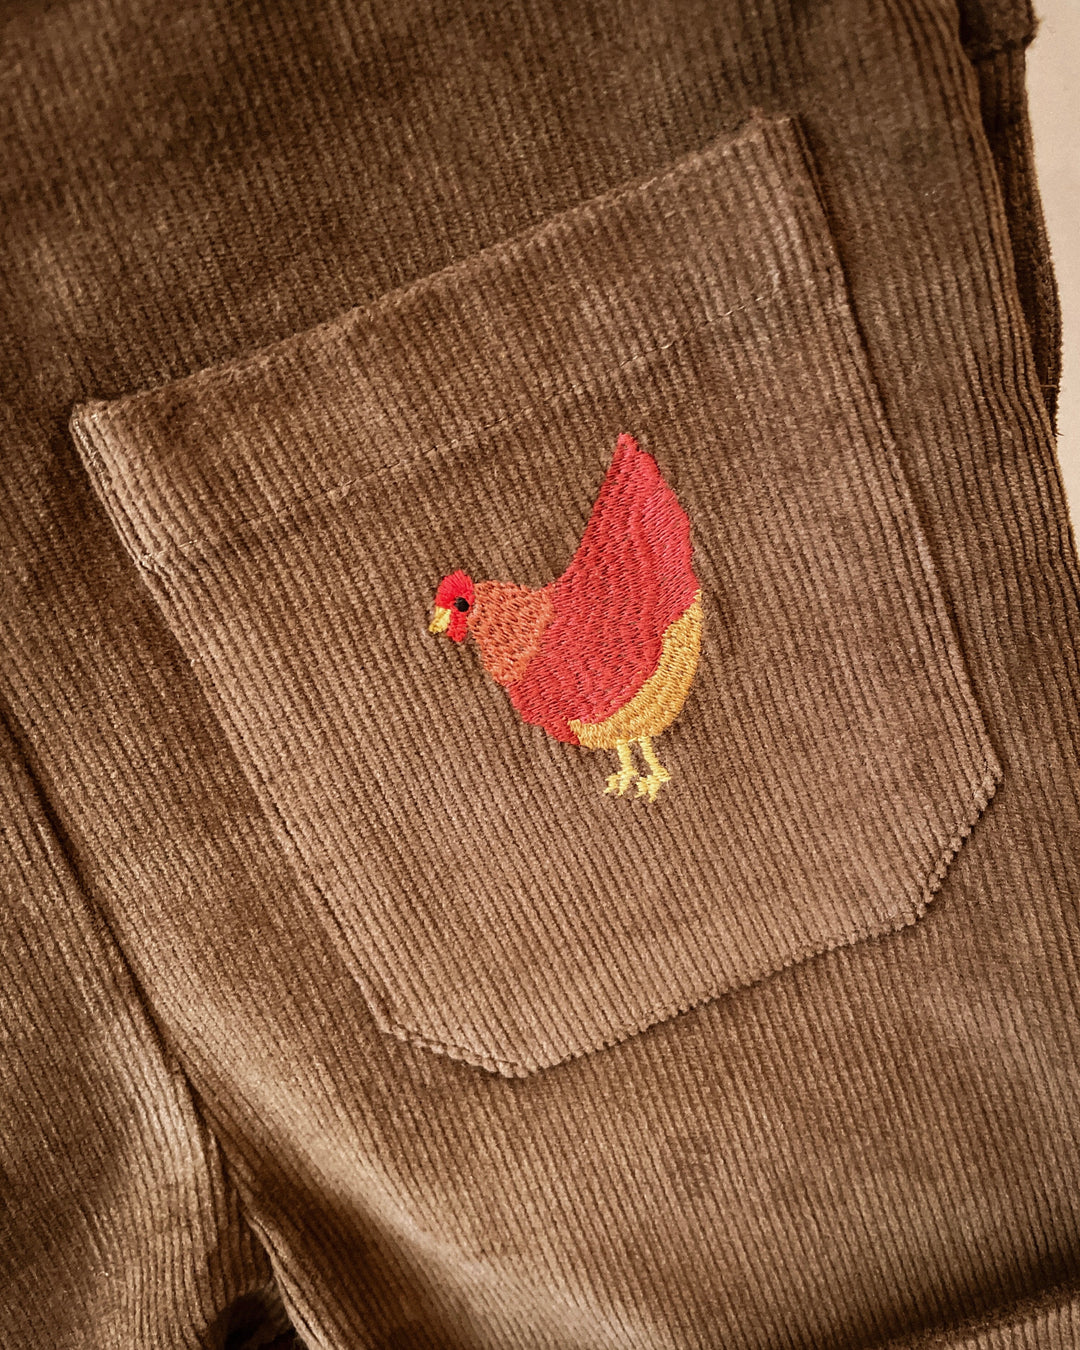 Soft Corduroy Chicken Embroidered Overalls - Long